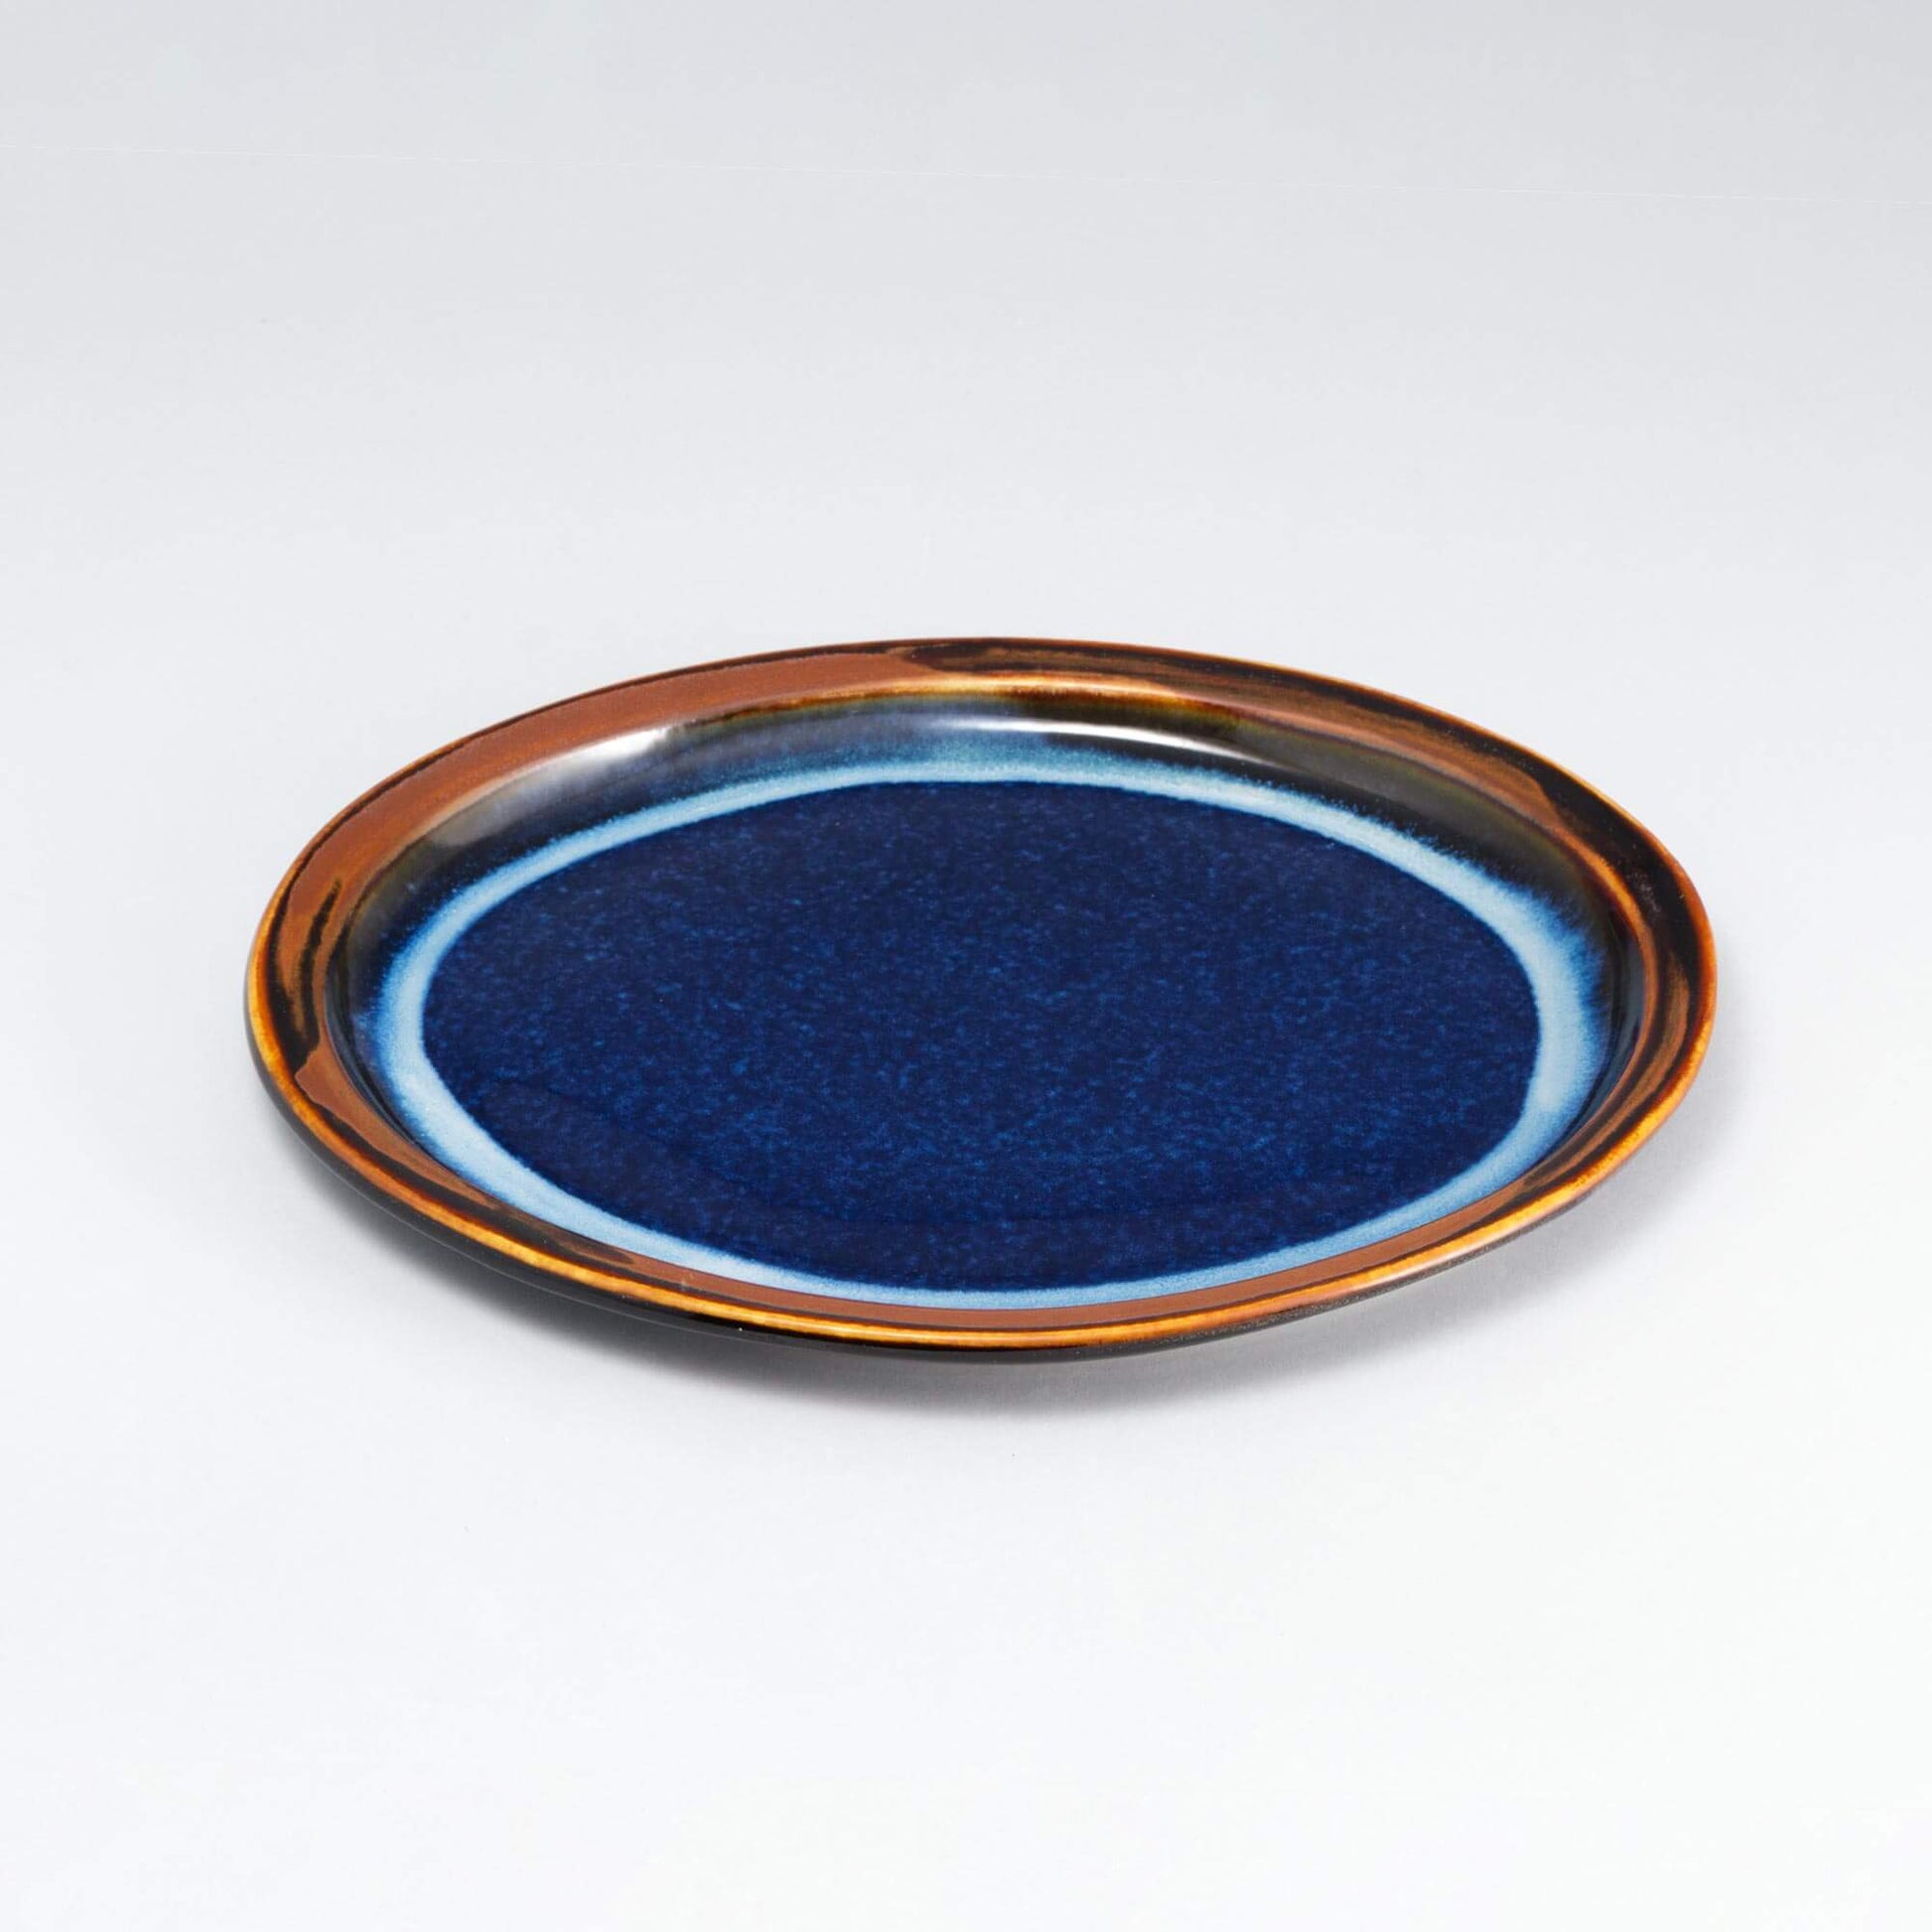 Handmade Pottery Oval Platter in Blue Hamada pattern made by Georgetown Pottery in Maine